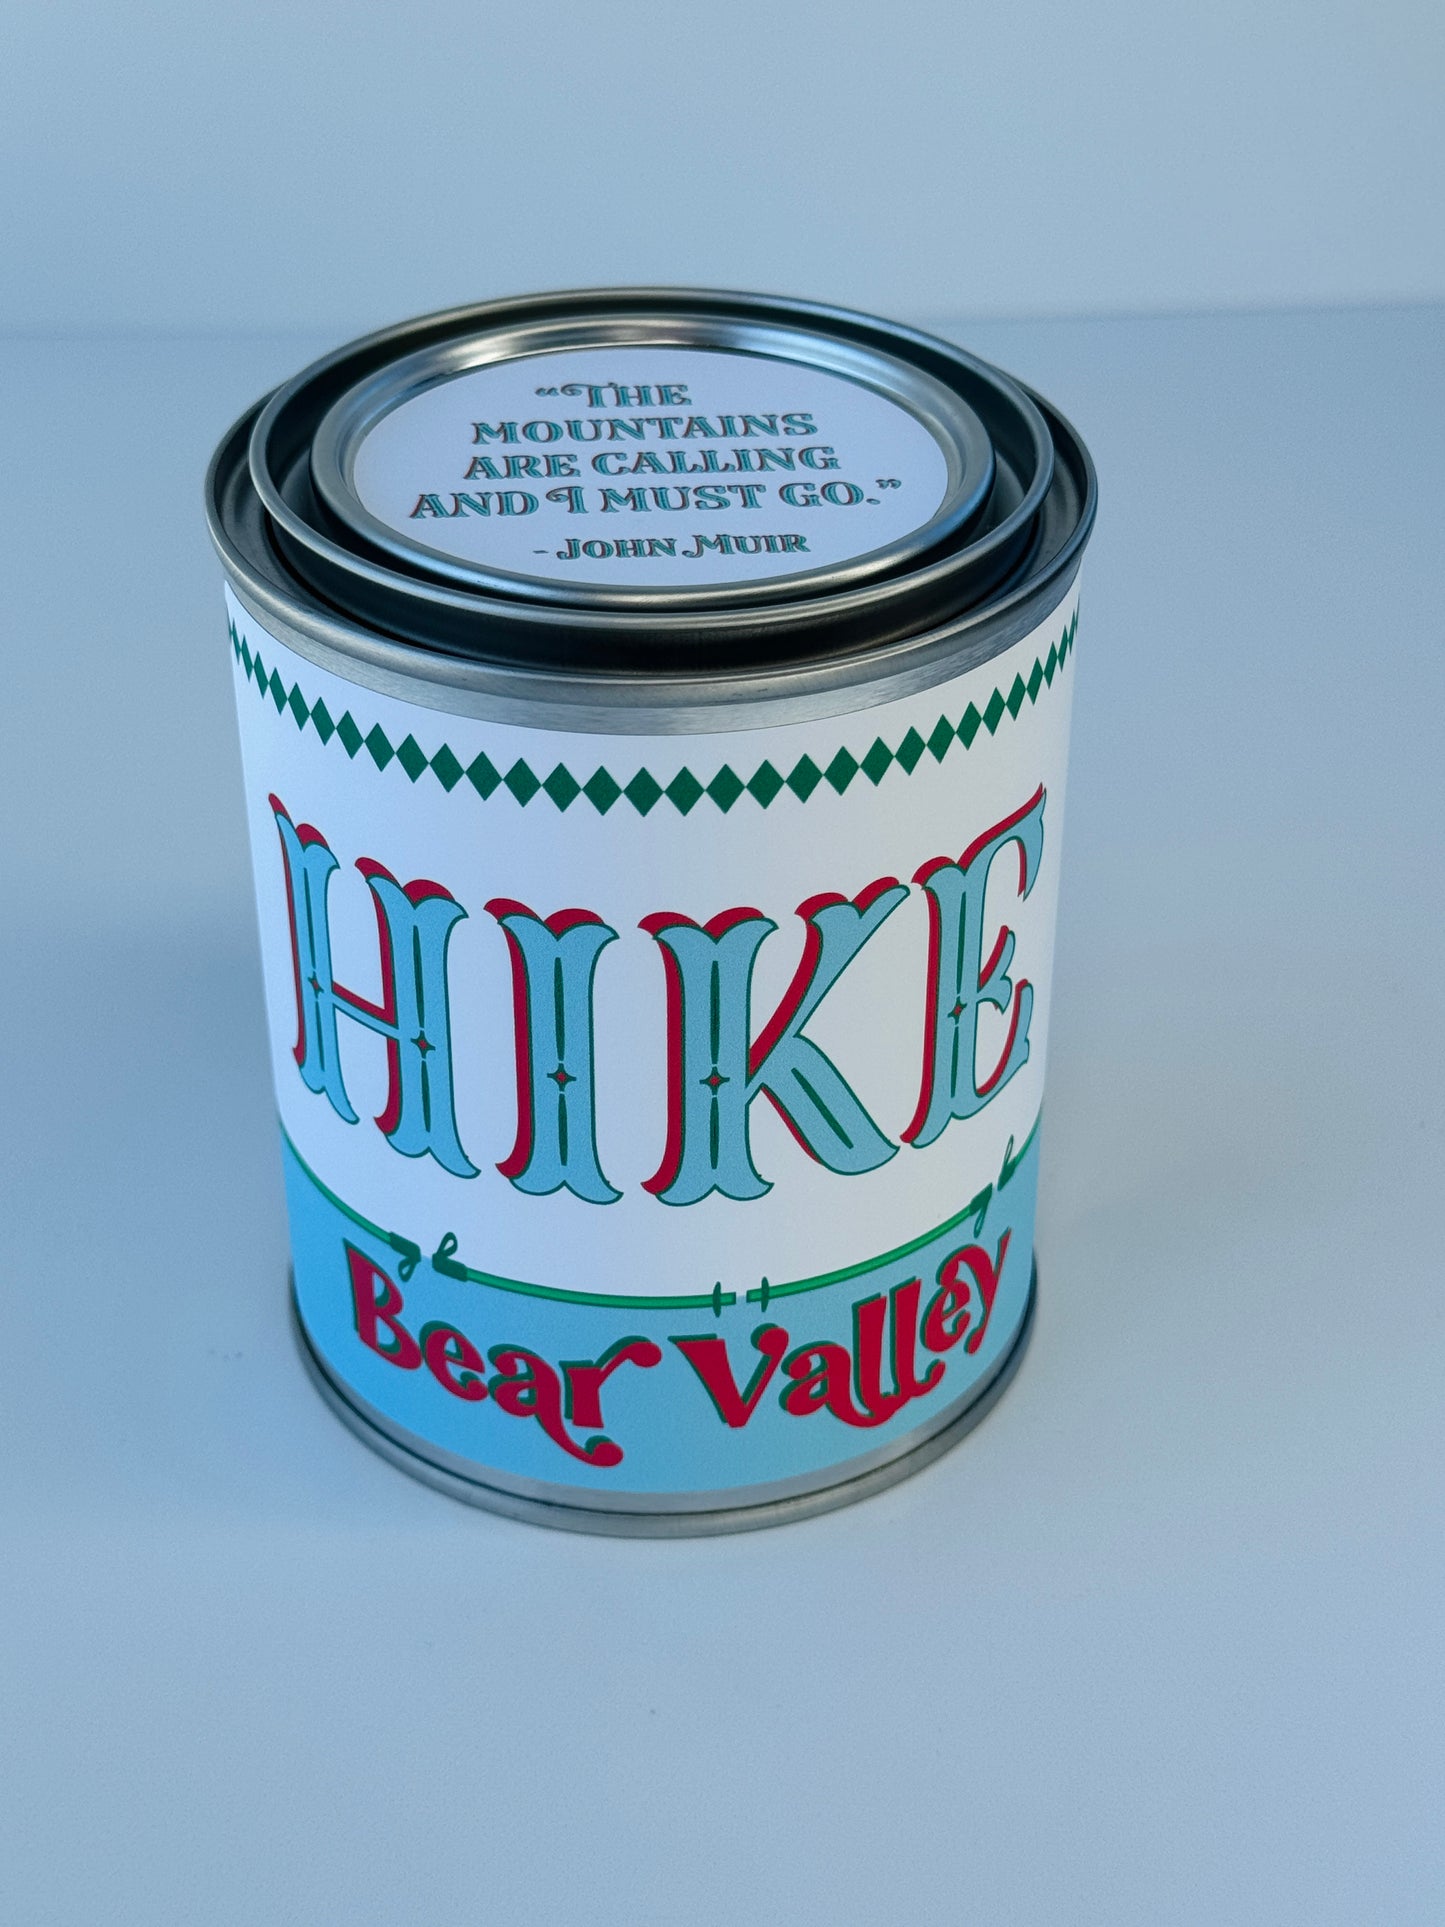 Hike Bear Valley - Paint Tin Candle